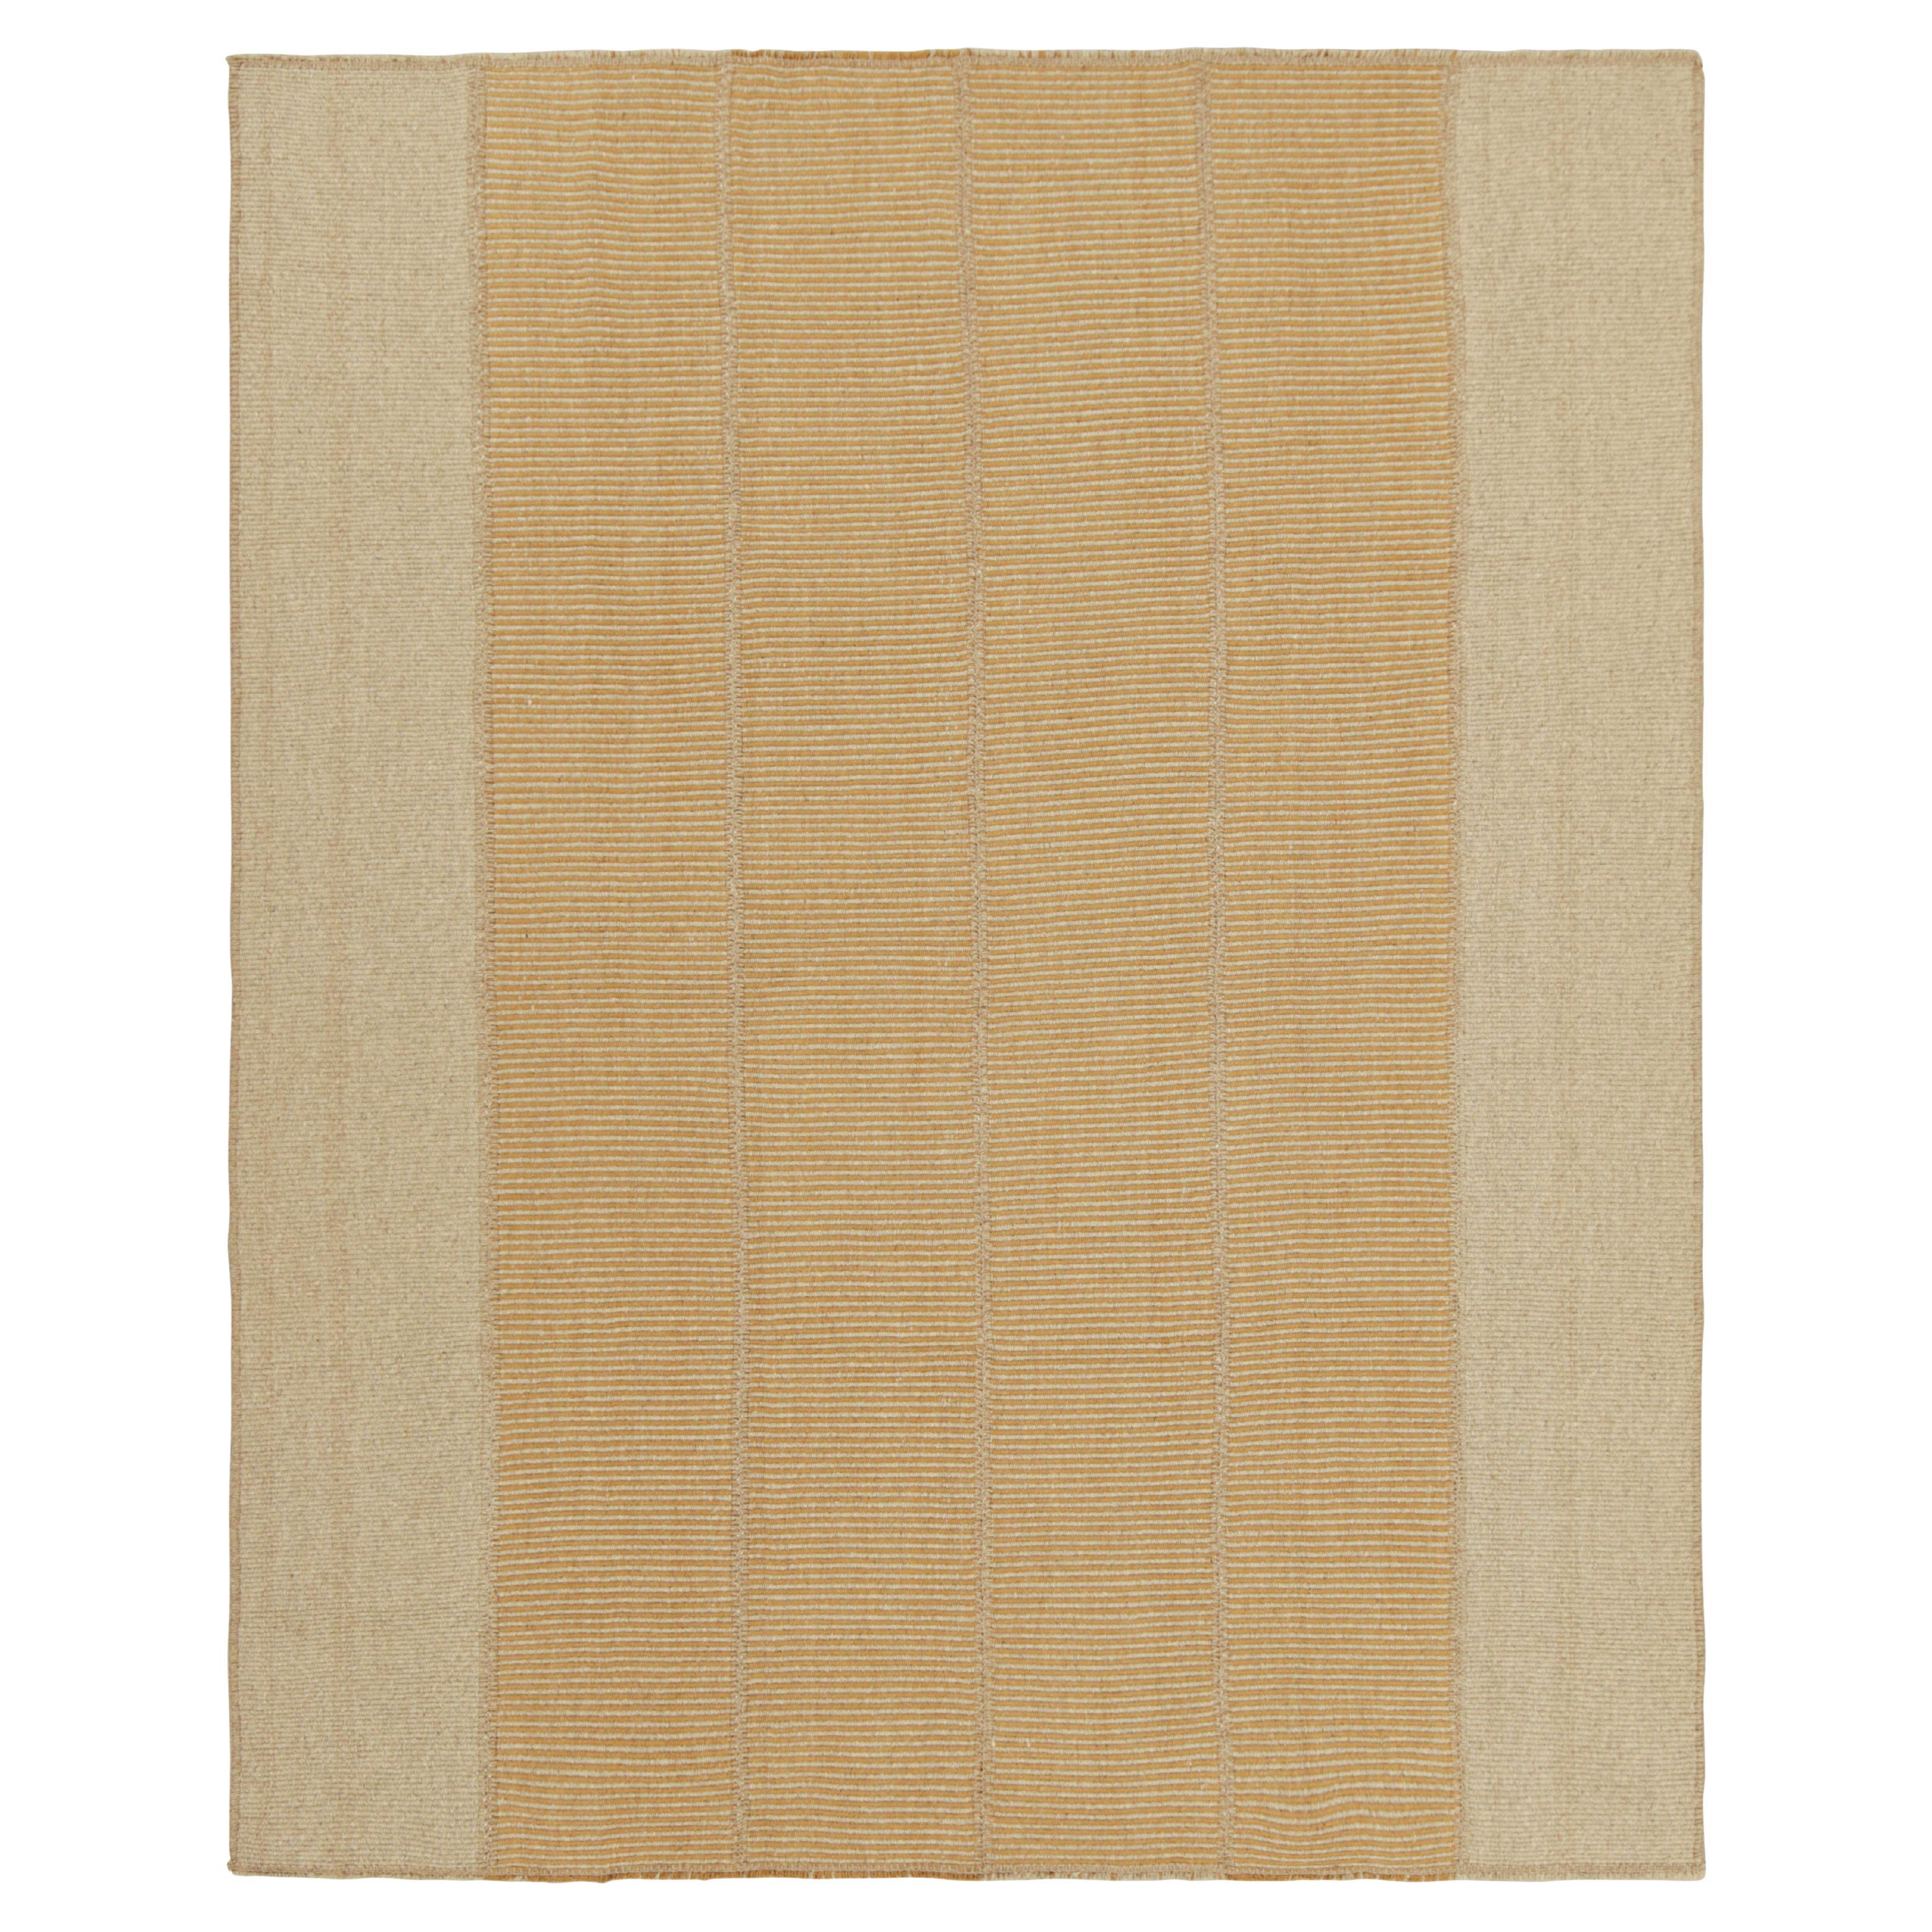 Rug & Kilim’s Contemporary Kilim in Beige and Orange Textural Stripes For Sale